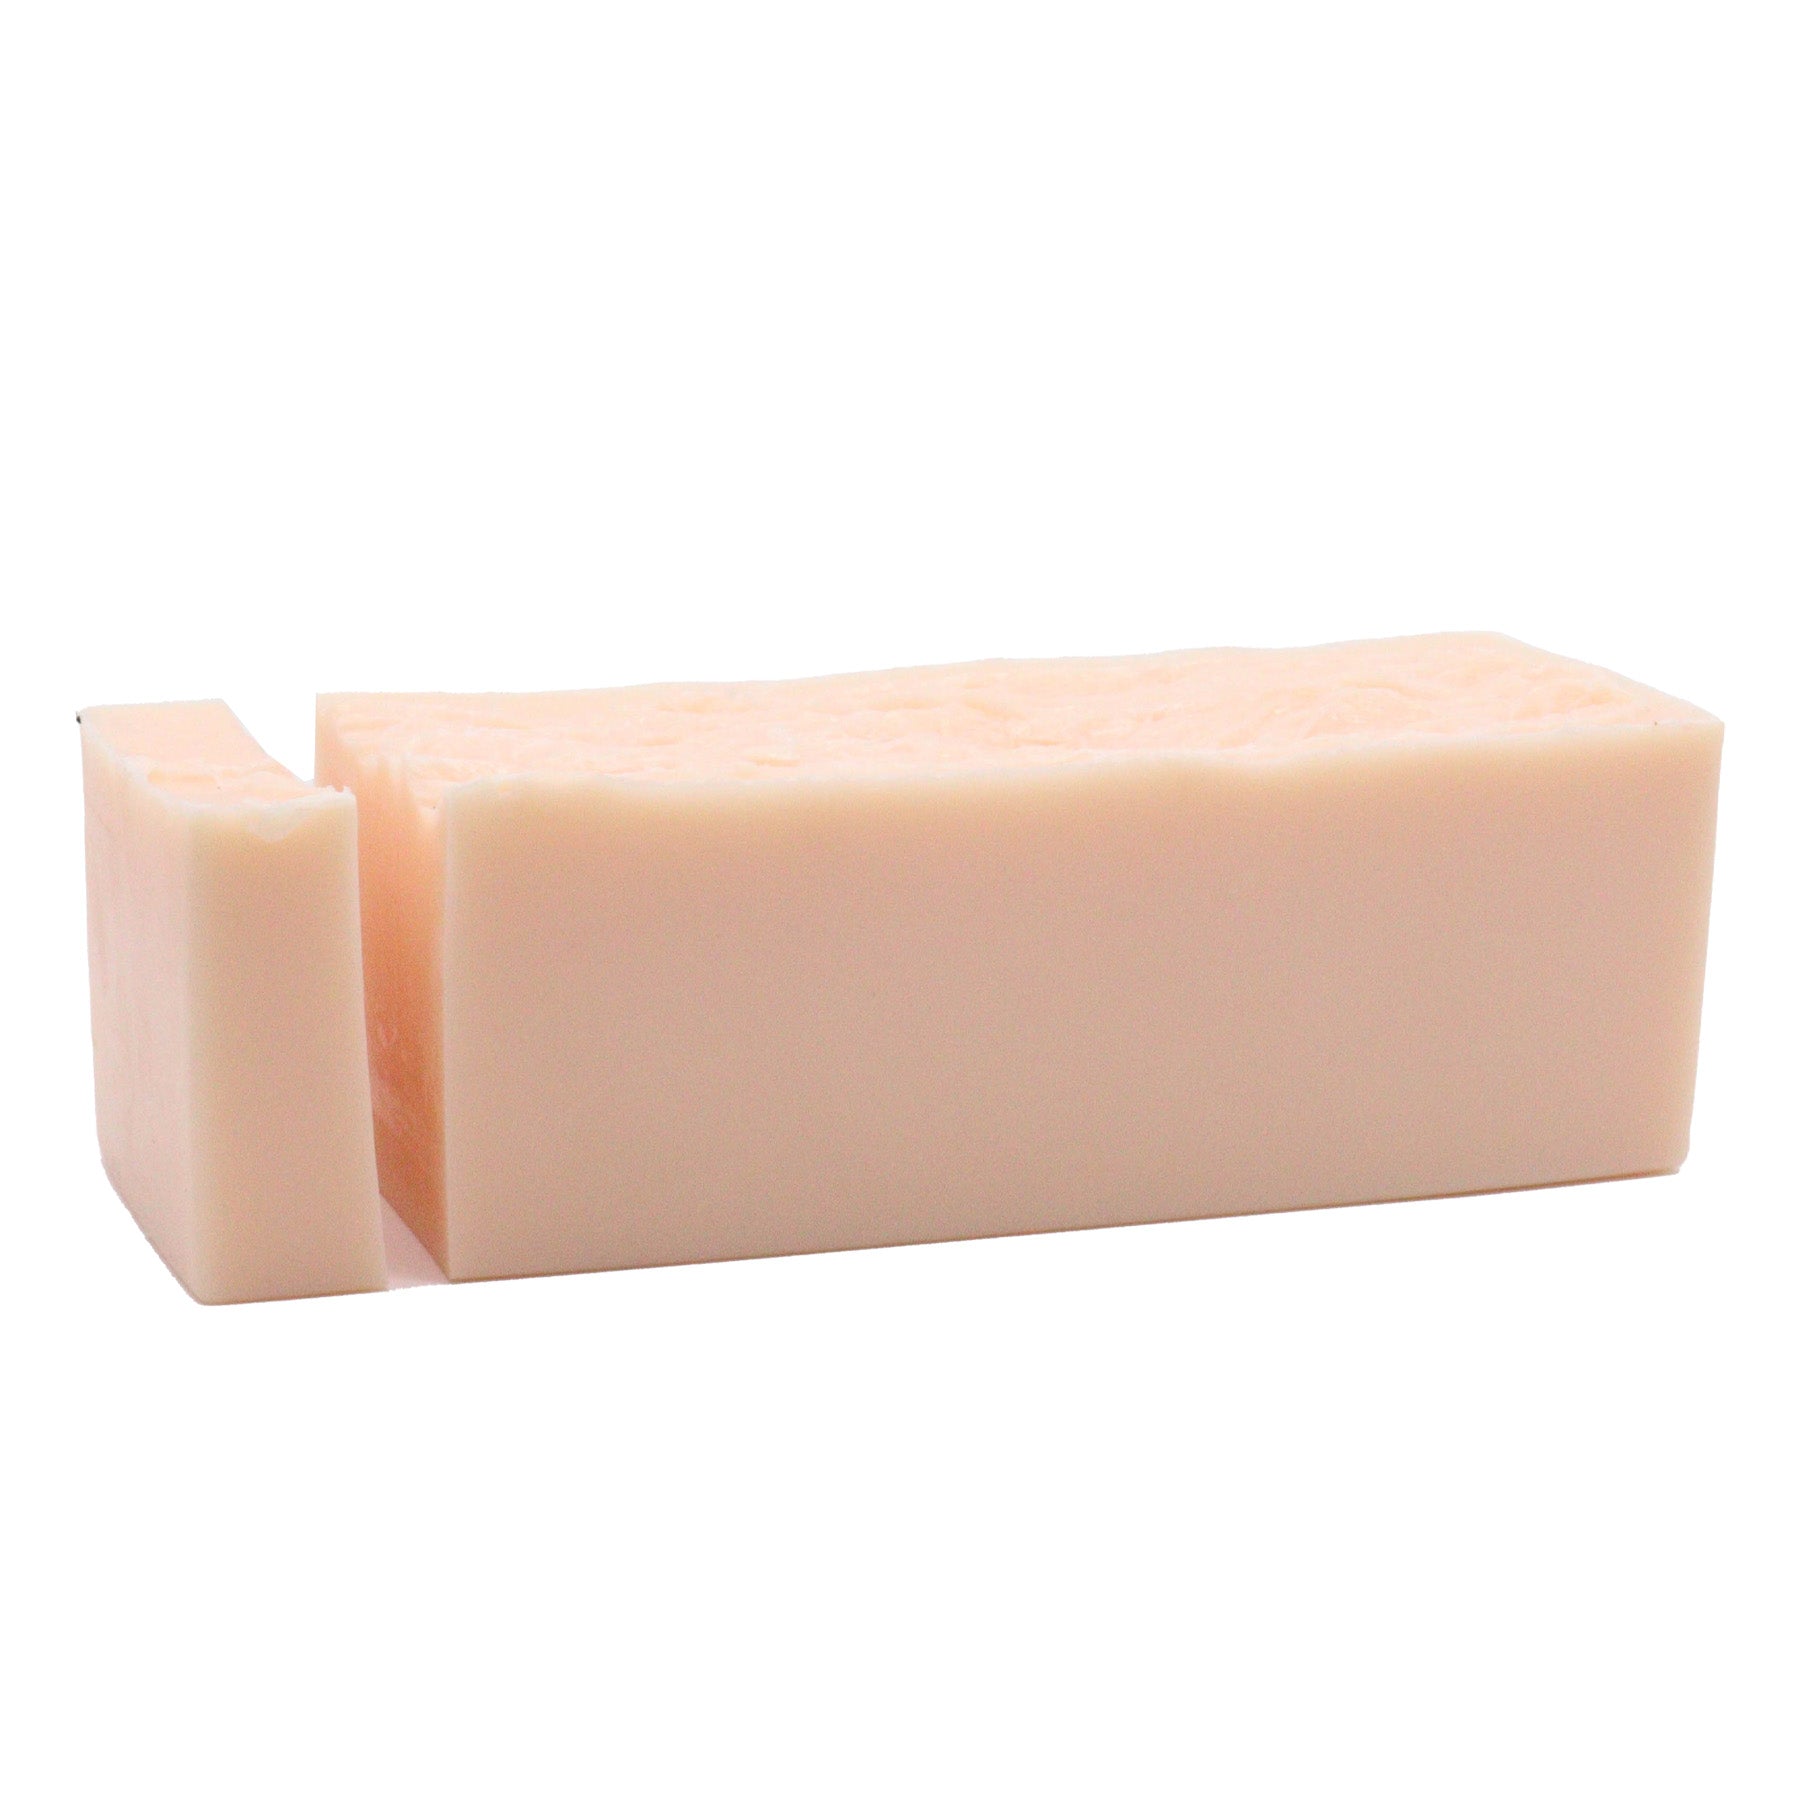 View Peach Orchid Soap Loaf information